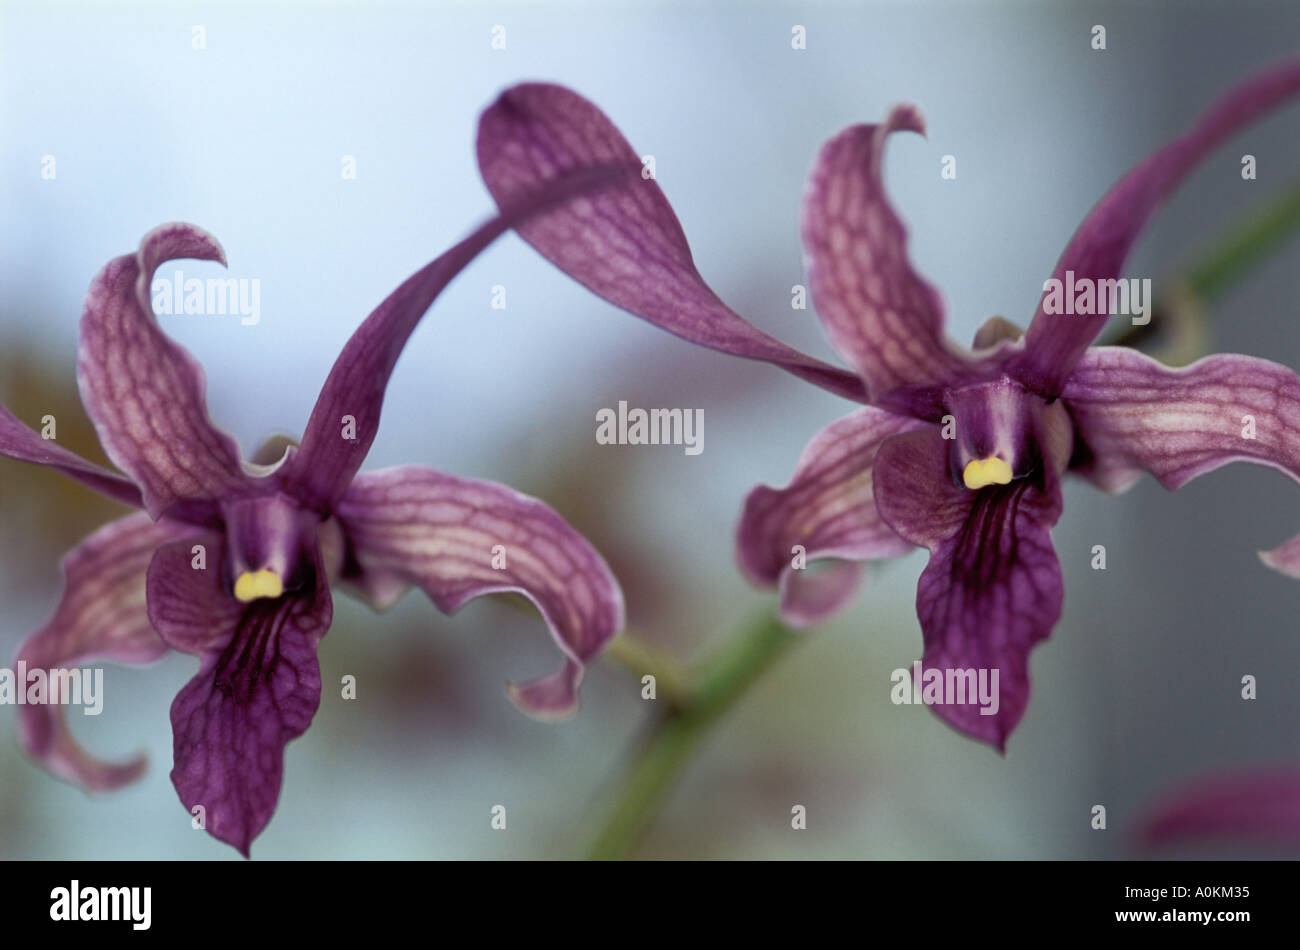 Group of Two Small Burgundy Orchids Stock Photo